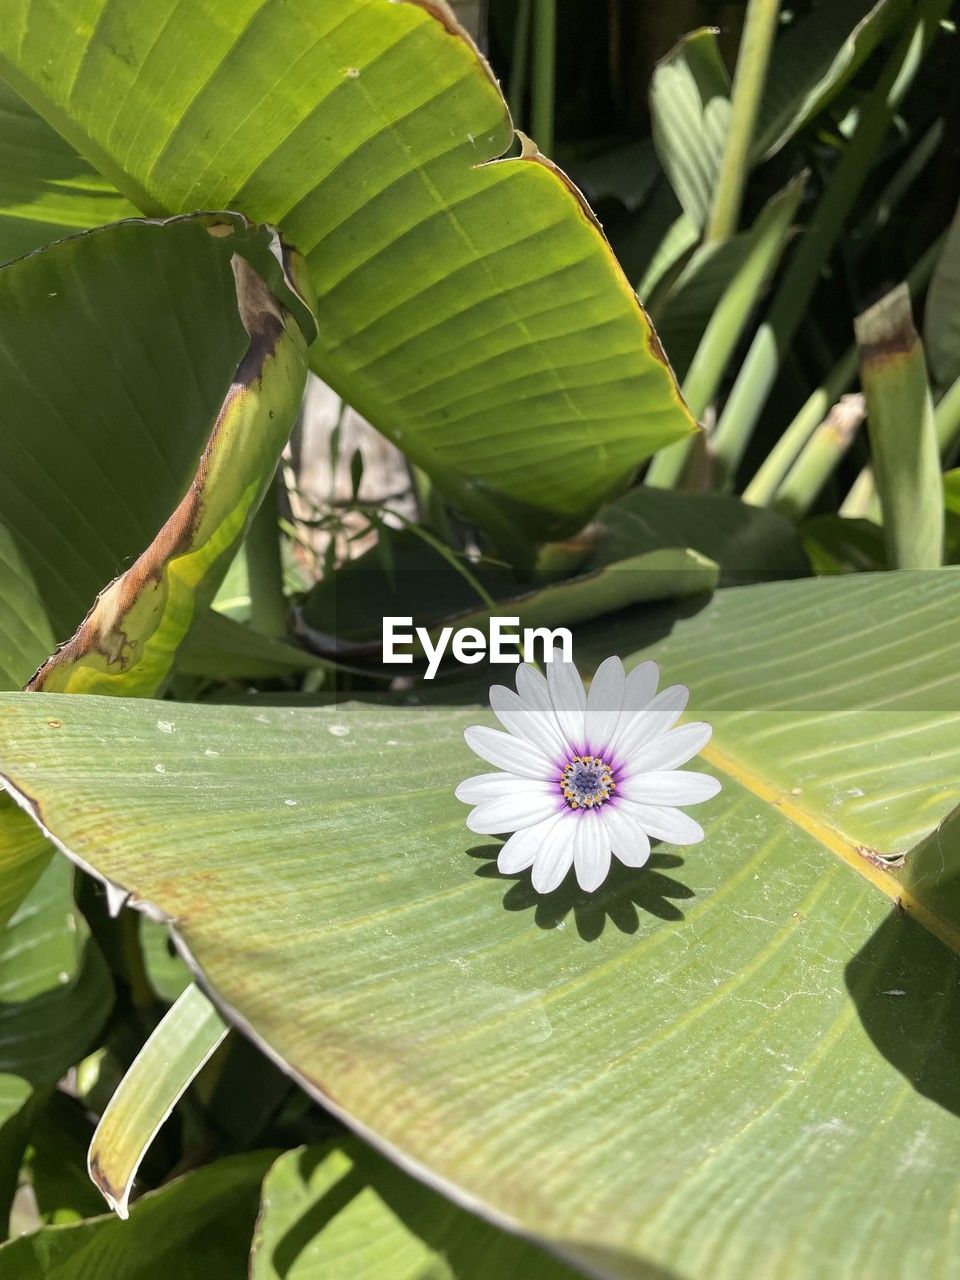 plant, leaf, flower, plant part, flowering plant, beauty in nature, green, freshness, nature, growth, close-up, no people, fragility, petal, inflorescence, flower head, water, day, outdoors, water lily, banana leaf, sunlight, botany, tree, tranquility